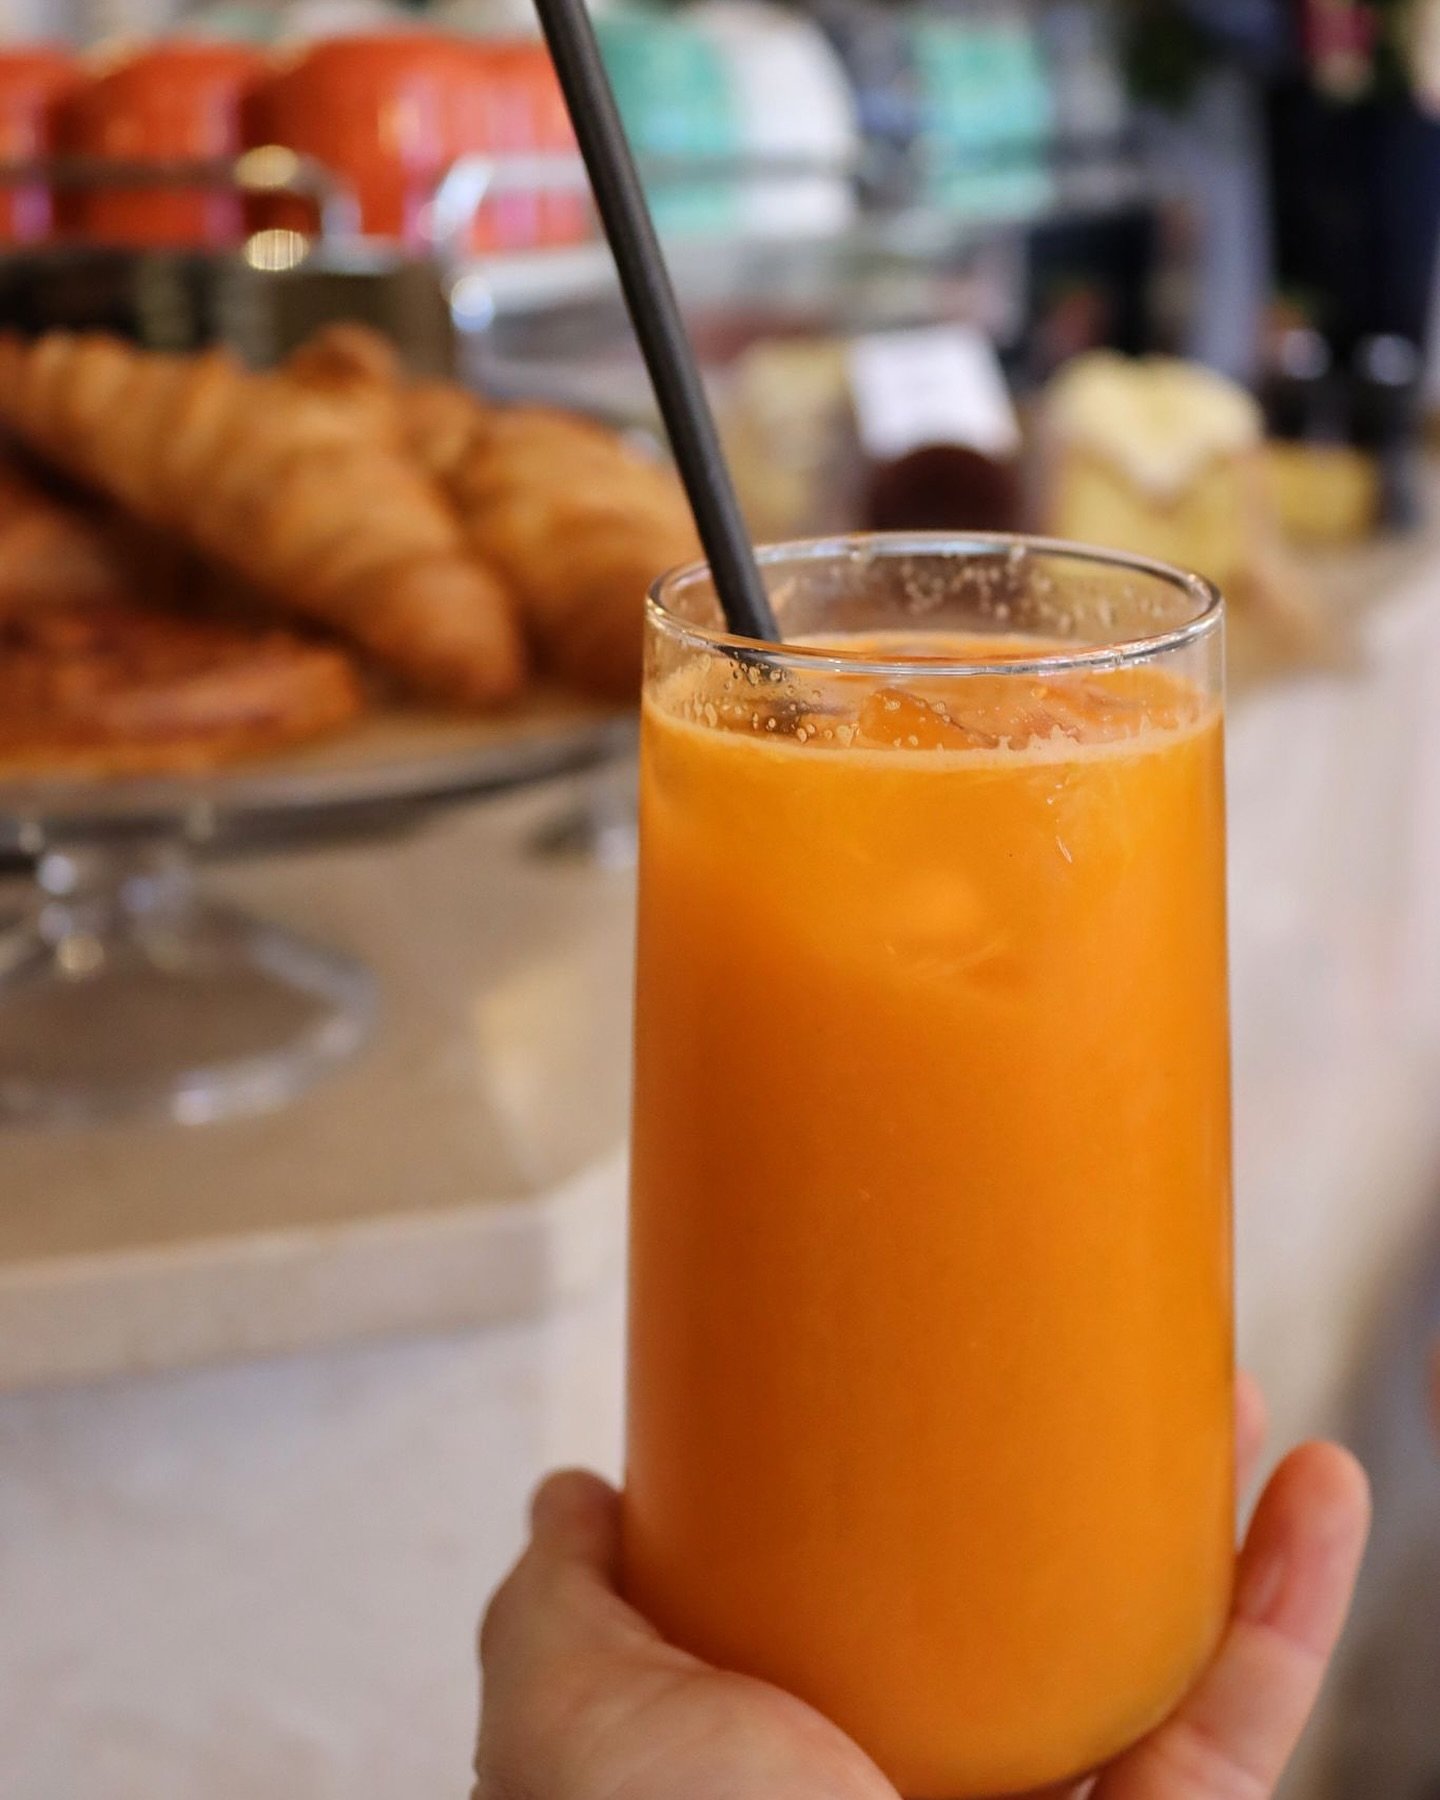 Sunshine and fresh juice&mdash;what could be better? ☀️🍹 Cheers to bright skies and even brighter flavours!
.
.
.
.
#EnglandsGrace #FreshJuice #SummerVibes #StJohnsWood #juice #breakfast #brunch #instadrink #drinks #londonrestaurants